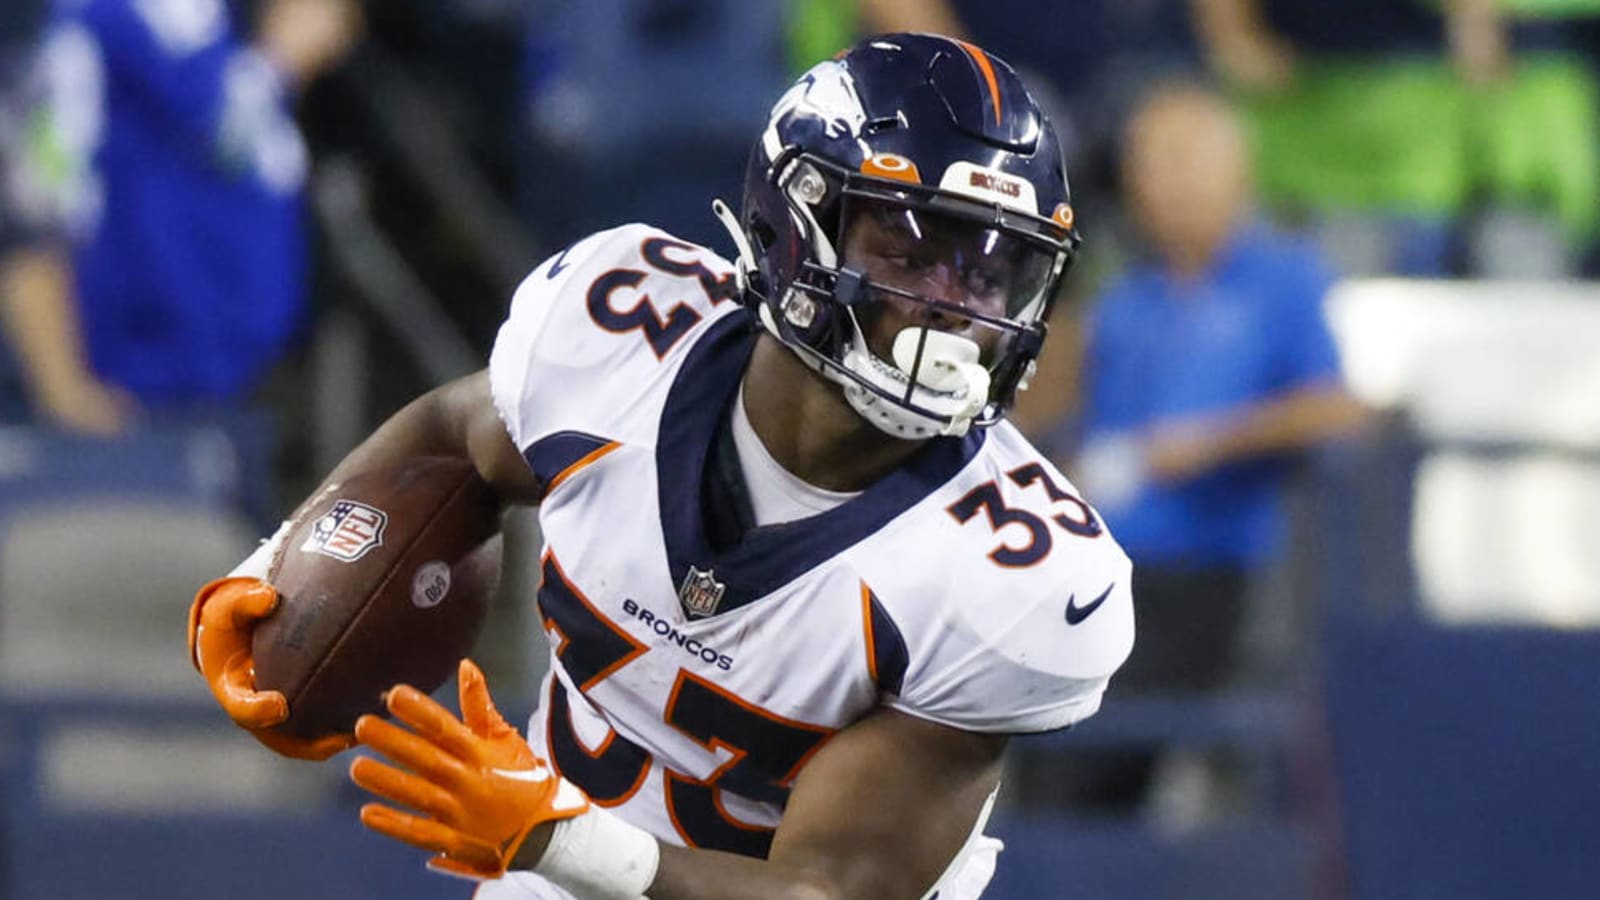 How Javonte Williams' recovery affects Broncos future at RB